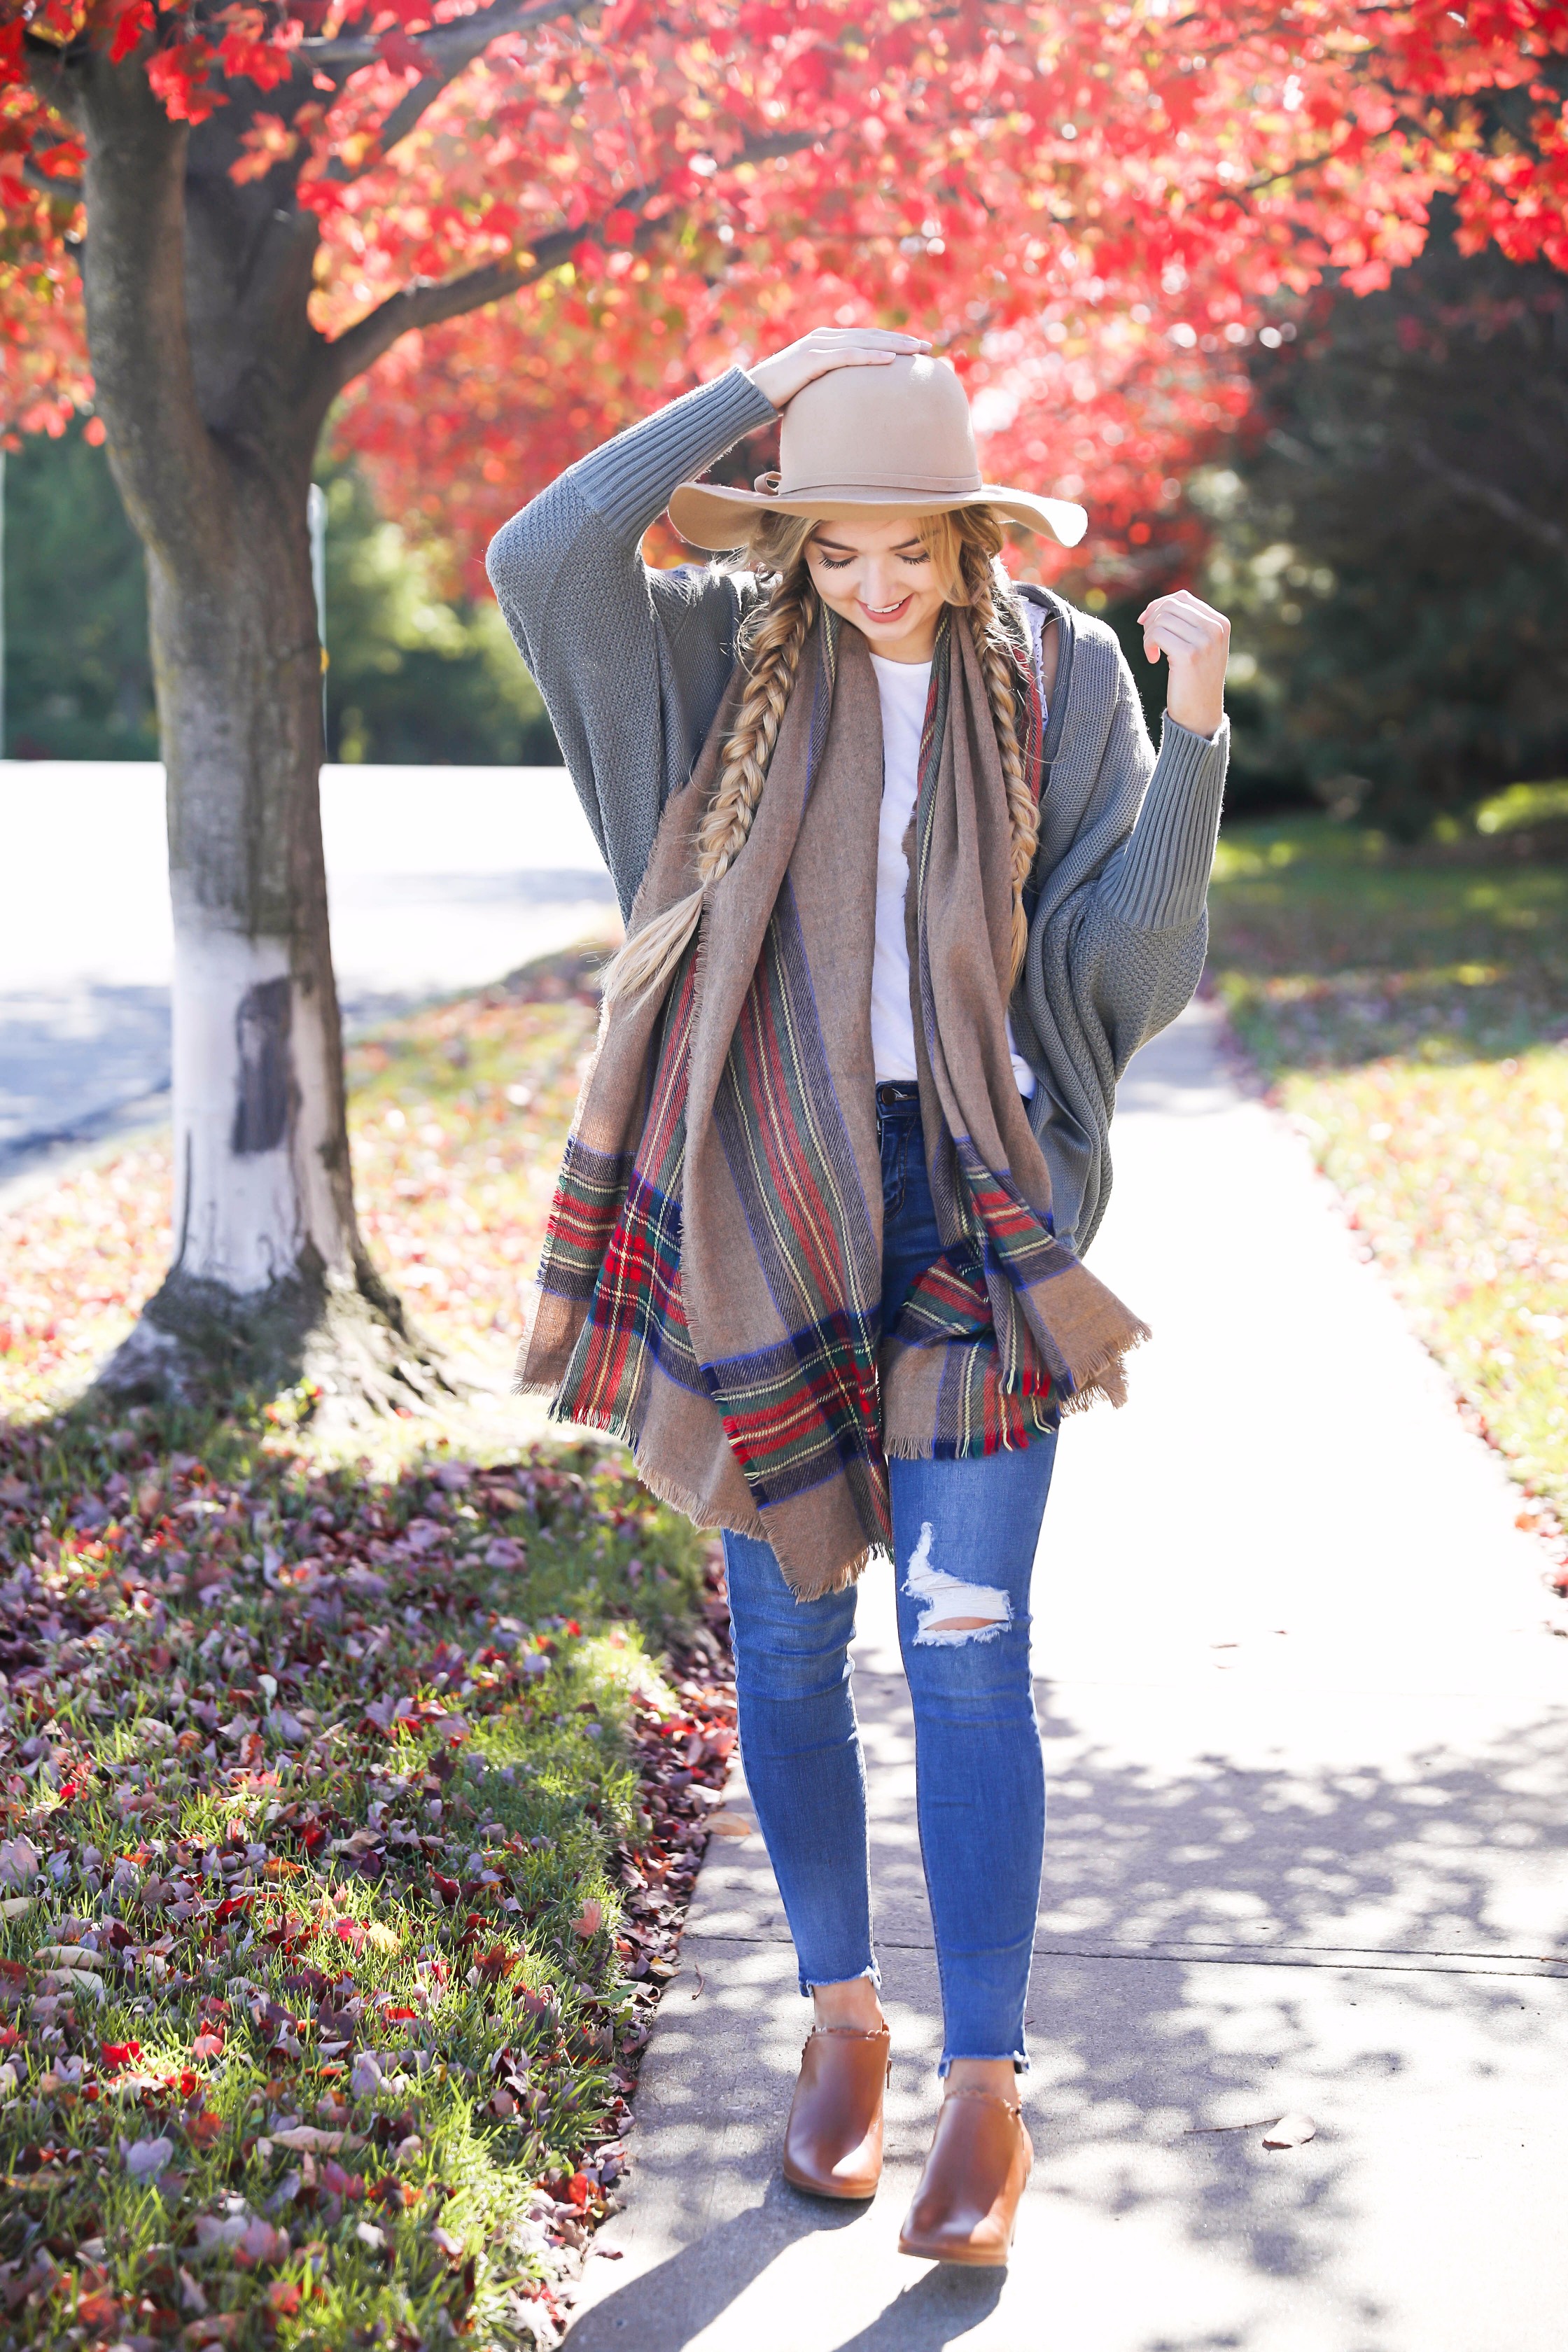 The perfect fall outfit with pretty fall leaves! Slouchy cardigan and plaid blanket scarf on fashion blog daily dose of charm by lauren lindmark